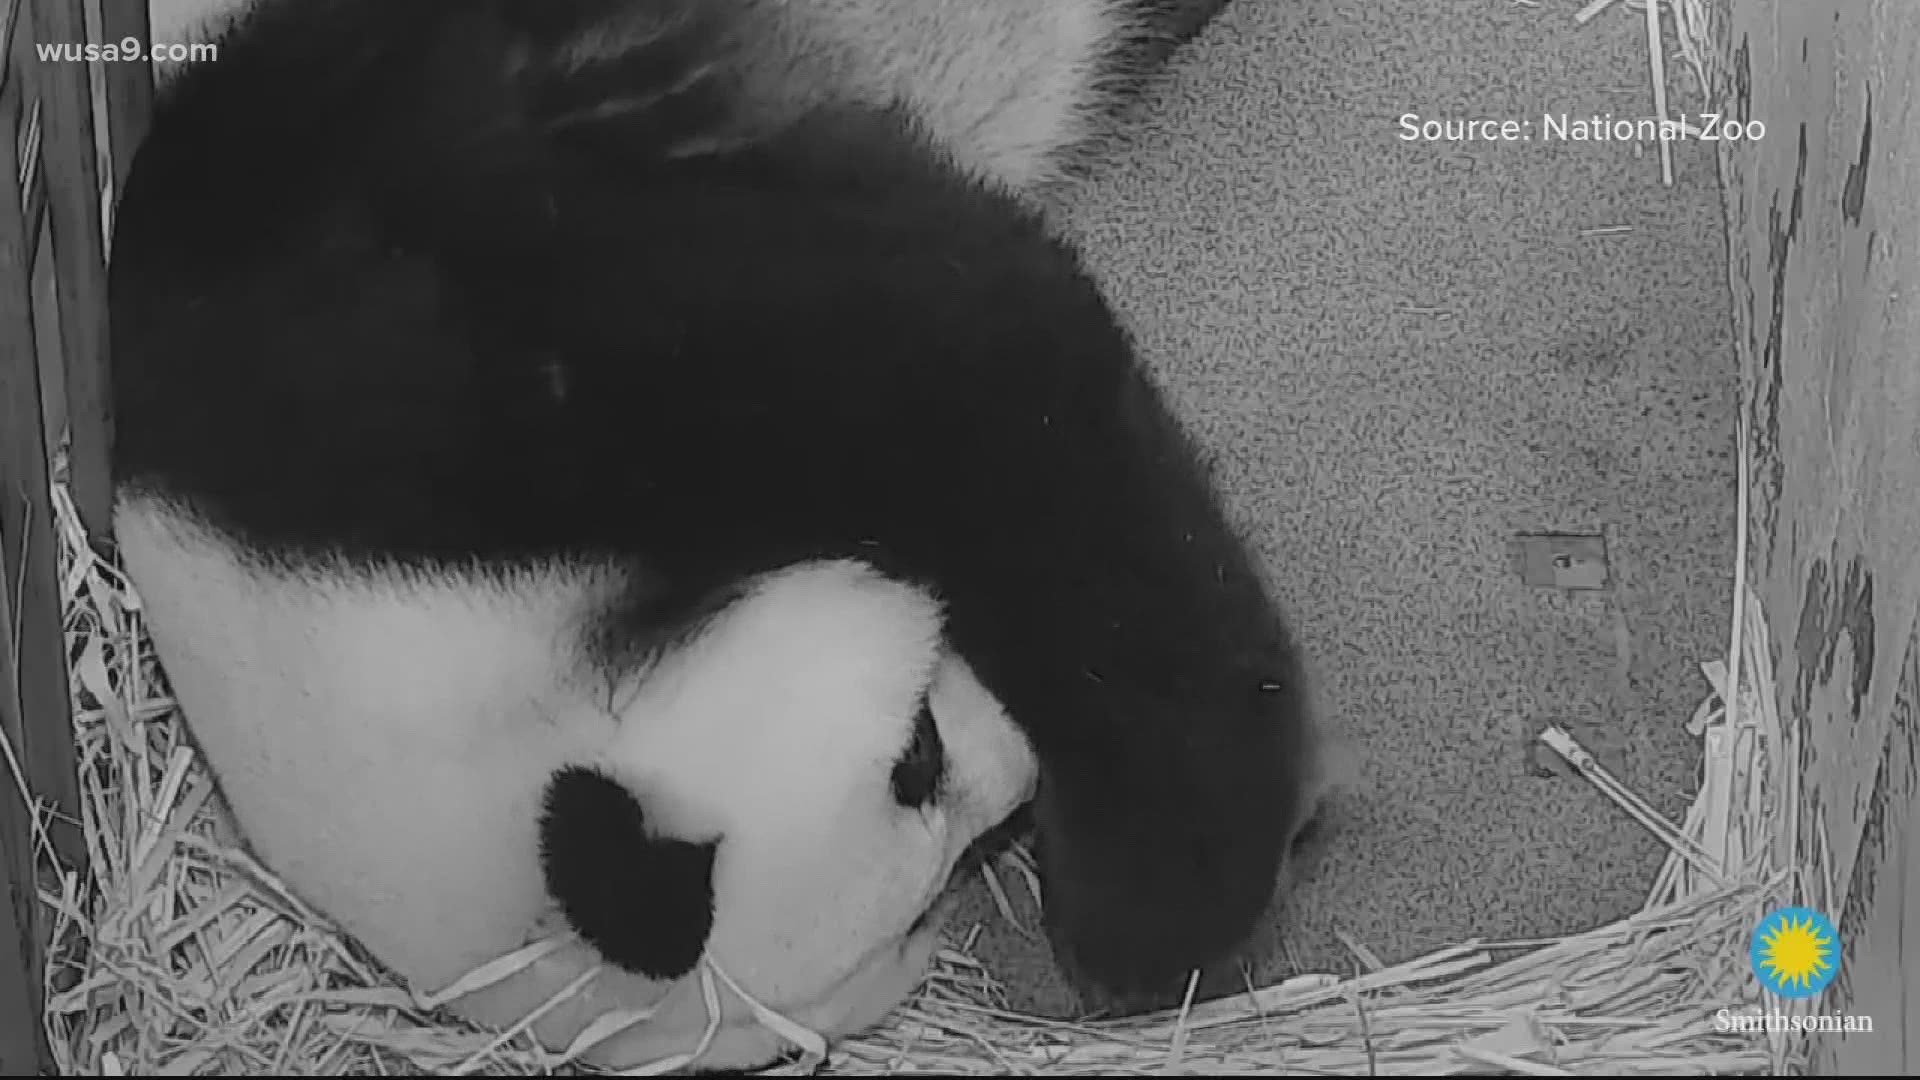 Mei Xiang is laying on her side with the cub between her forearms, which is something she didn't do with her other babies, allowing her to get more rest.